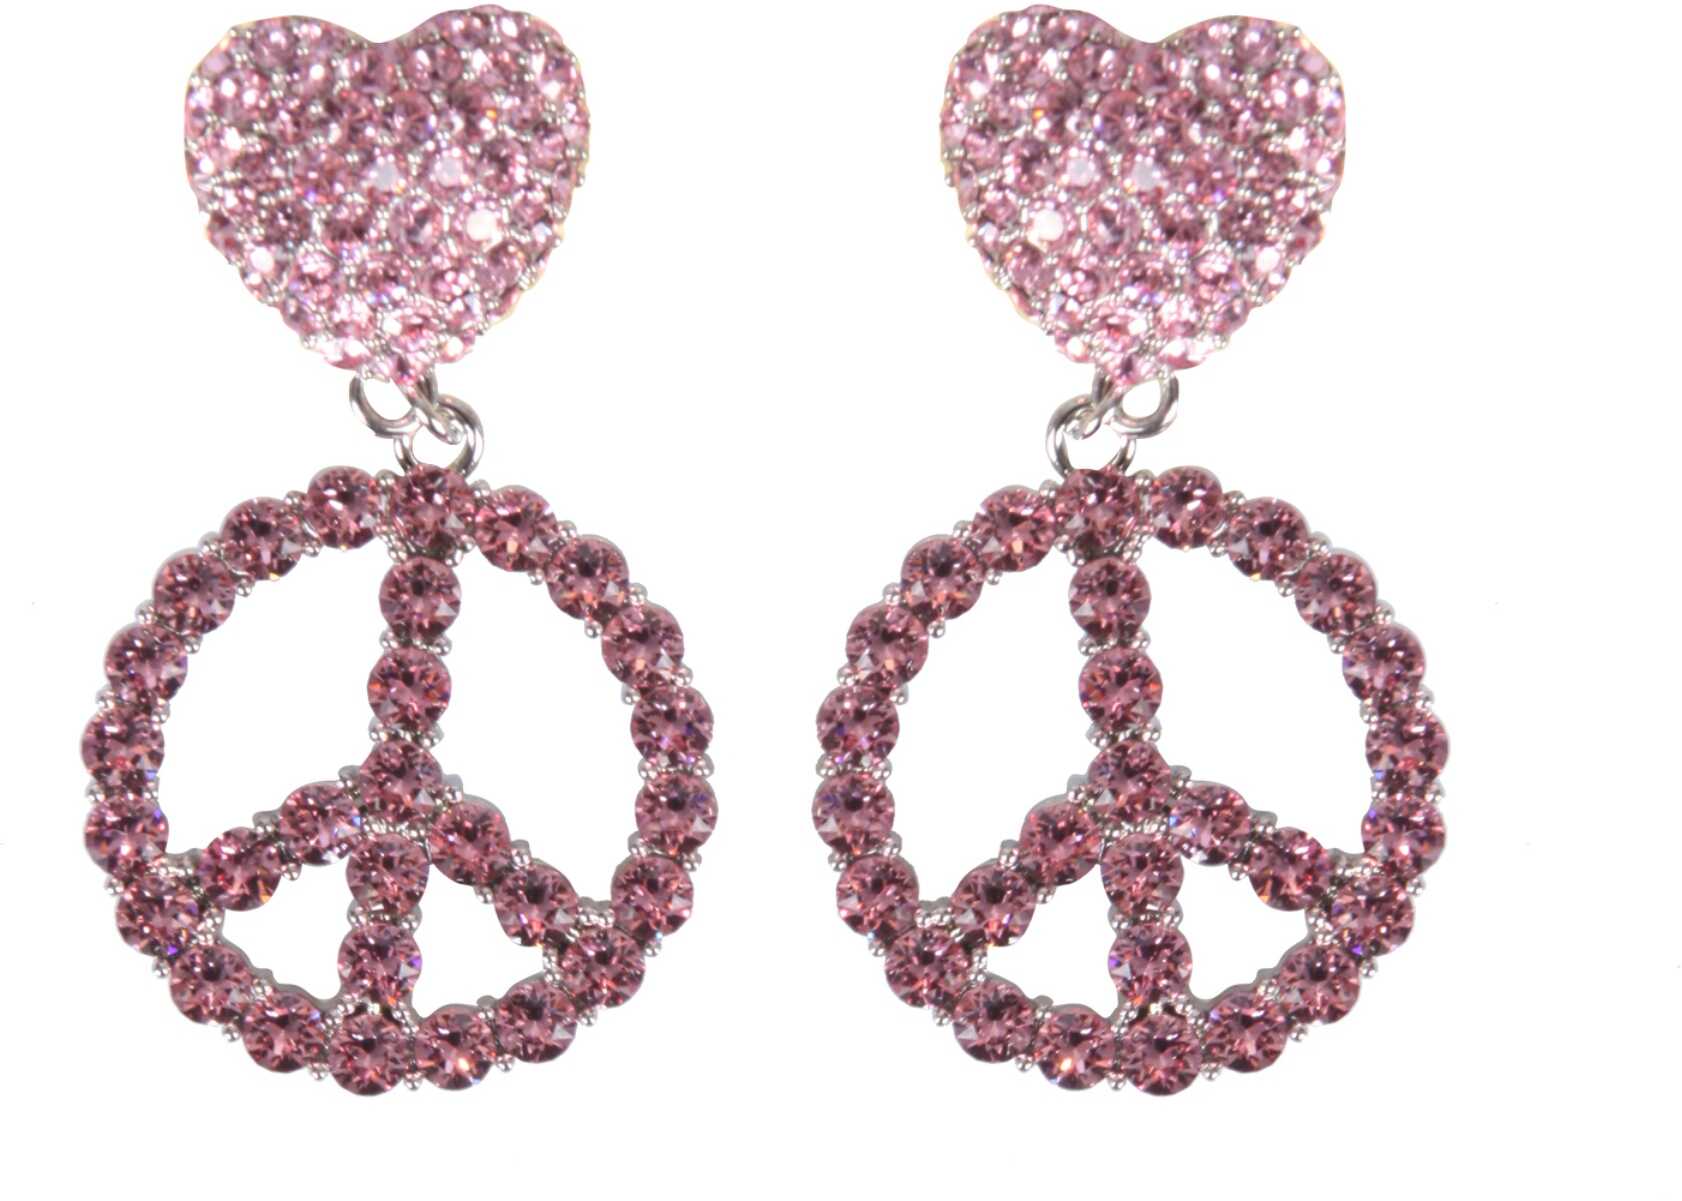 Moschino Peace Earrings PINK image12